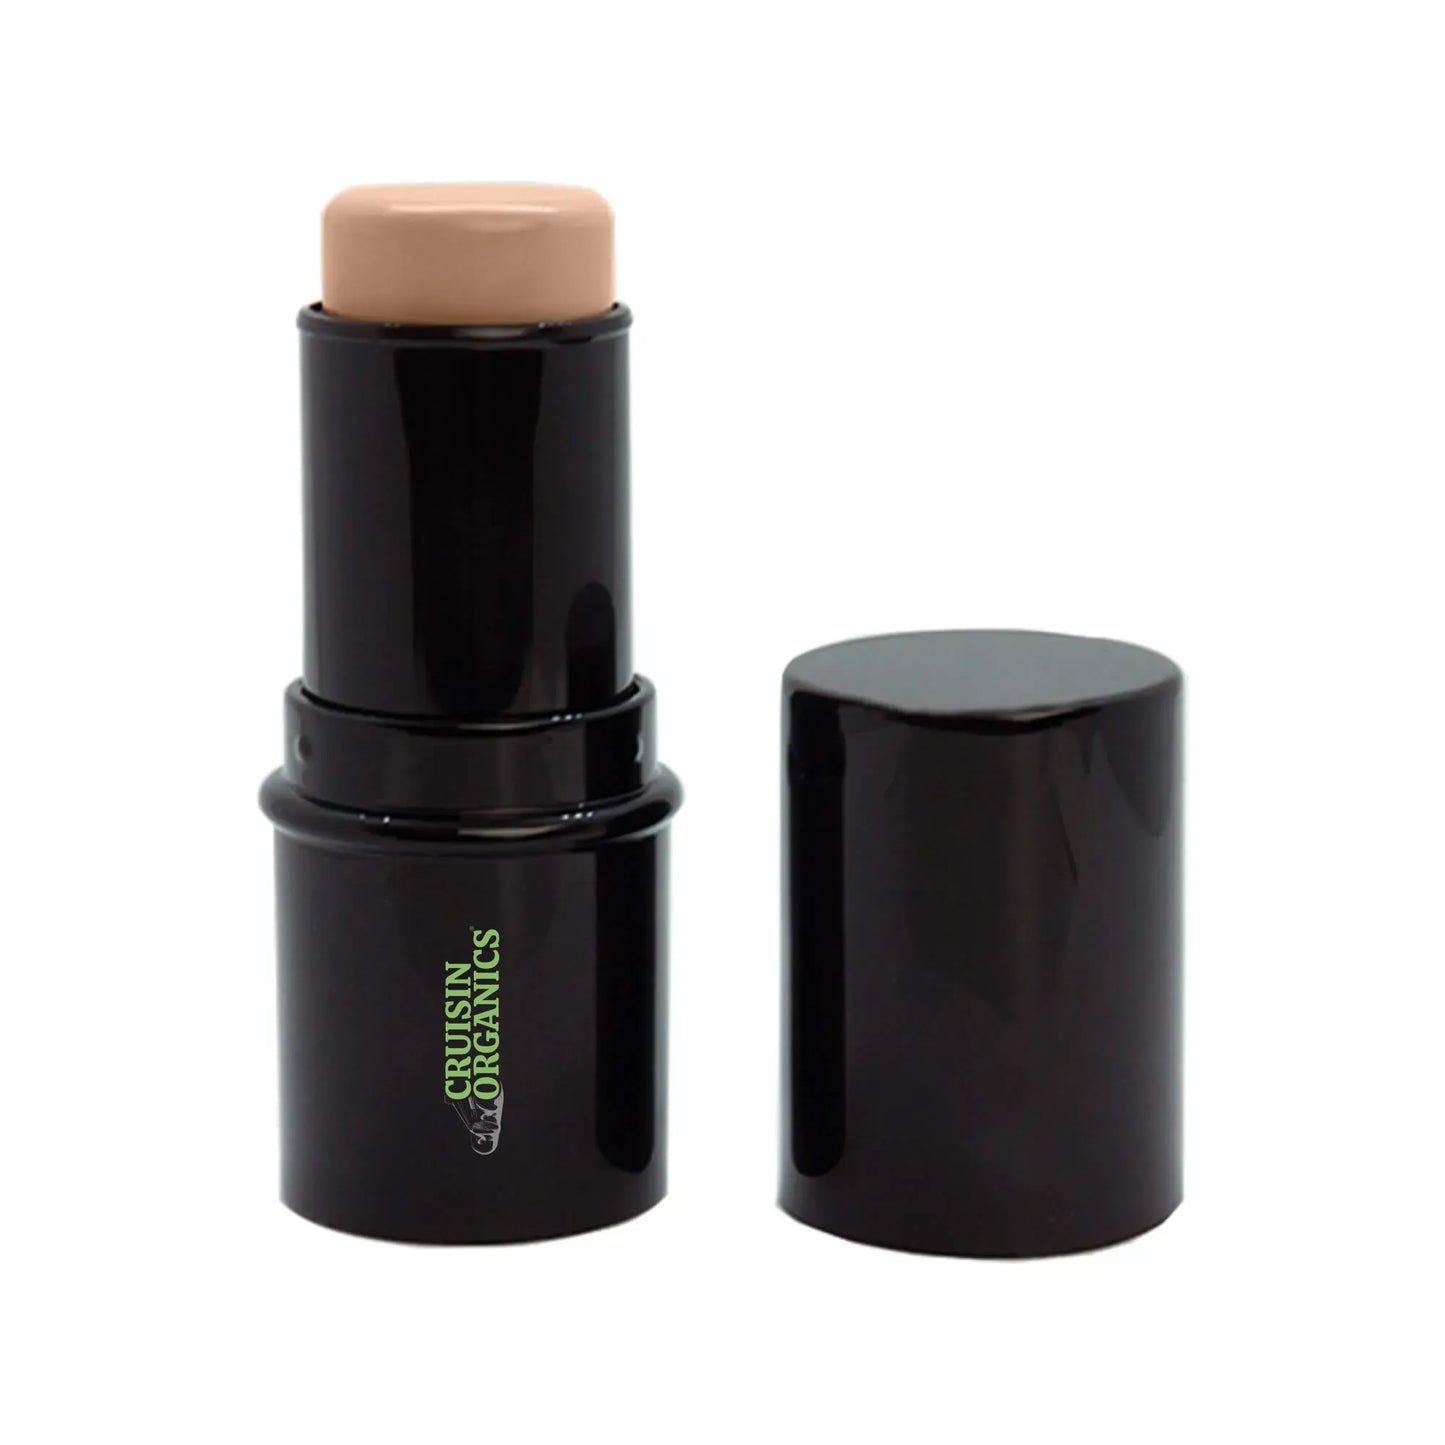 Cruisin Organics Sunrise concealer stick. . Correct imperfections with this easy-to-use compact concealer stick. Provides medium to full coverage with a matte finish. You can also use darker shades for contouring and lighter shades for highlighting.